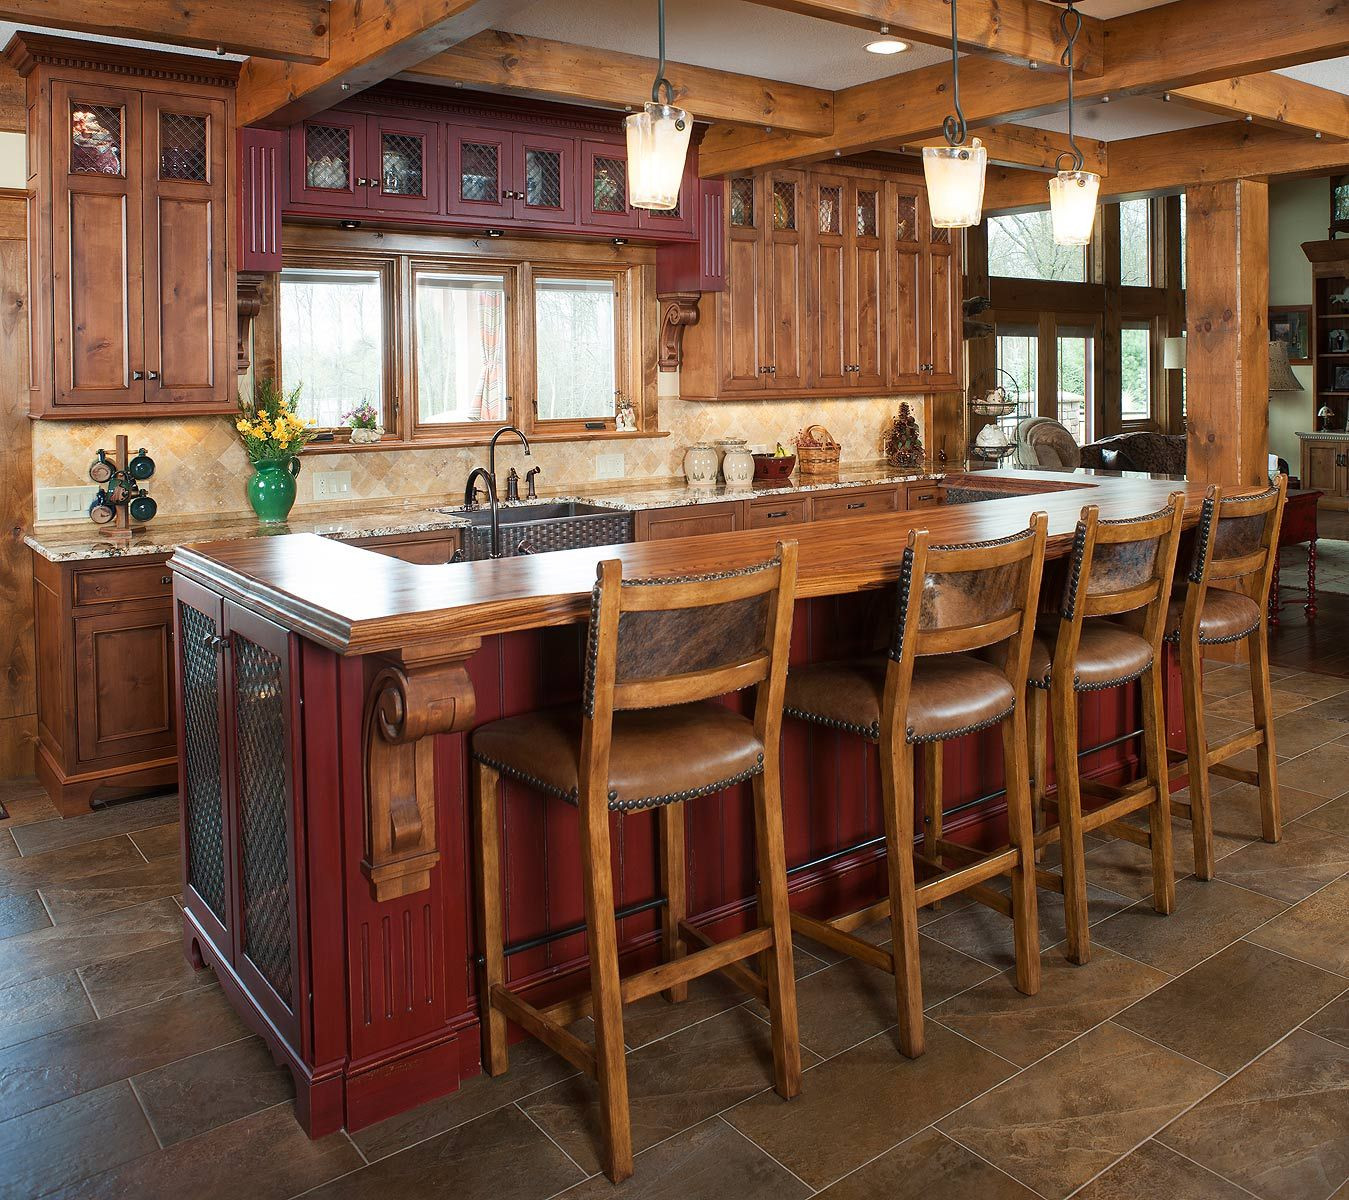 Rustic Kitchen Island With Seating
 Rustic kitchen and island in 2019